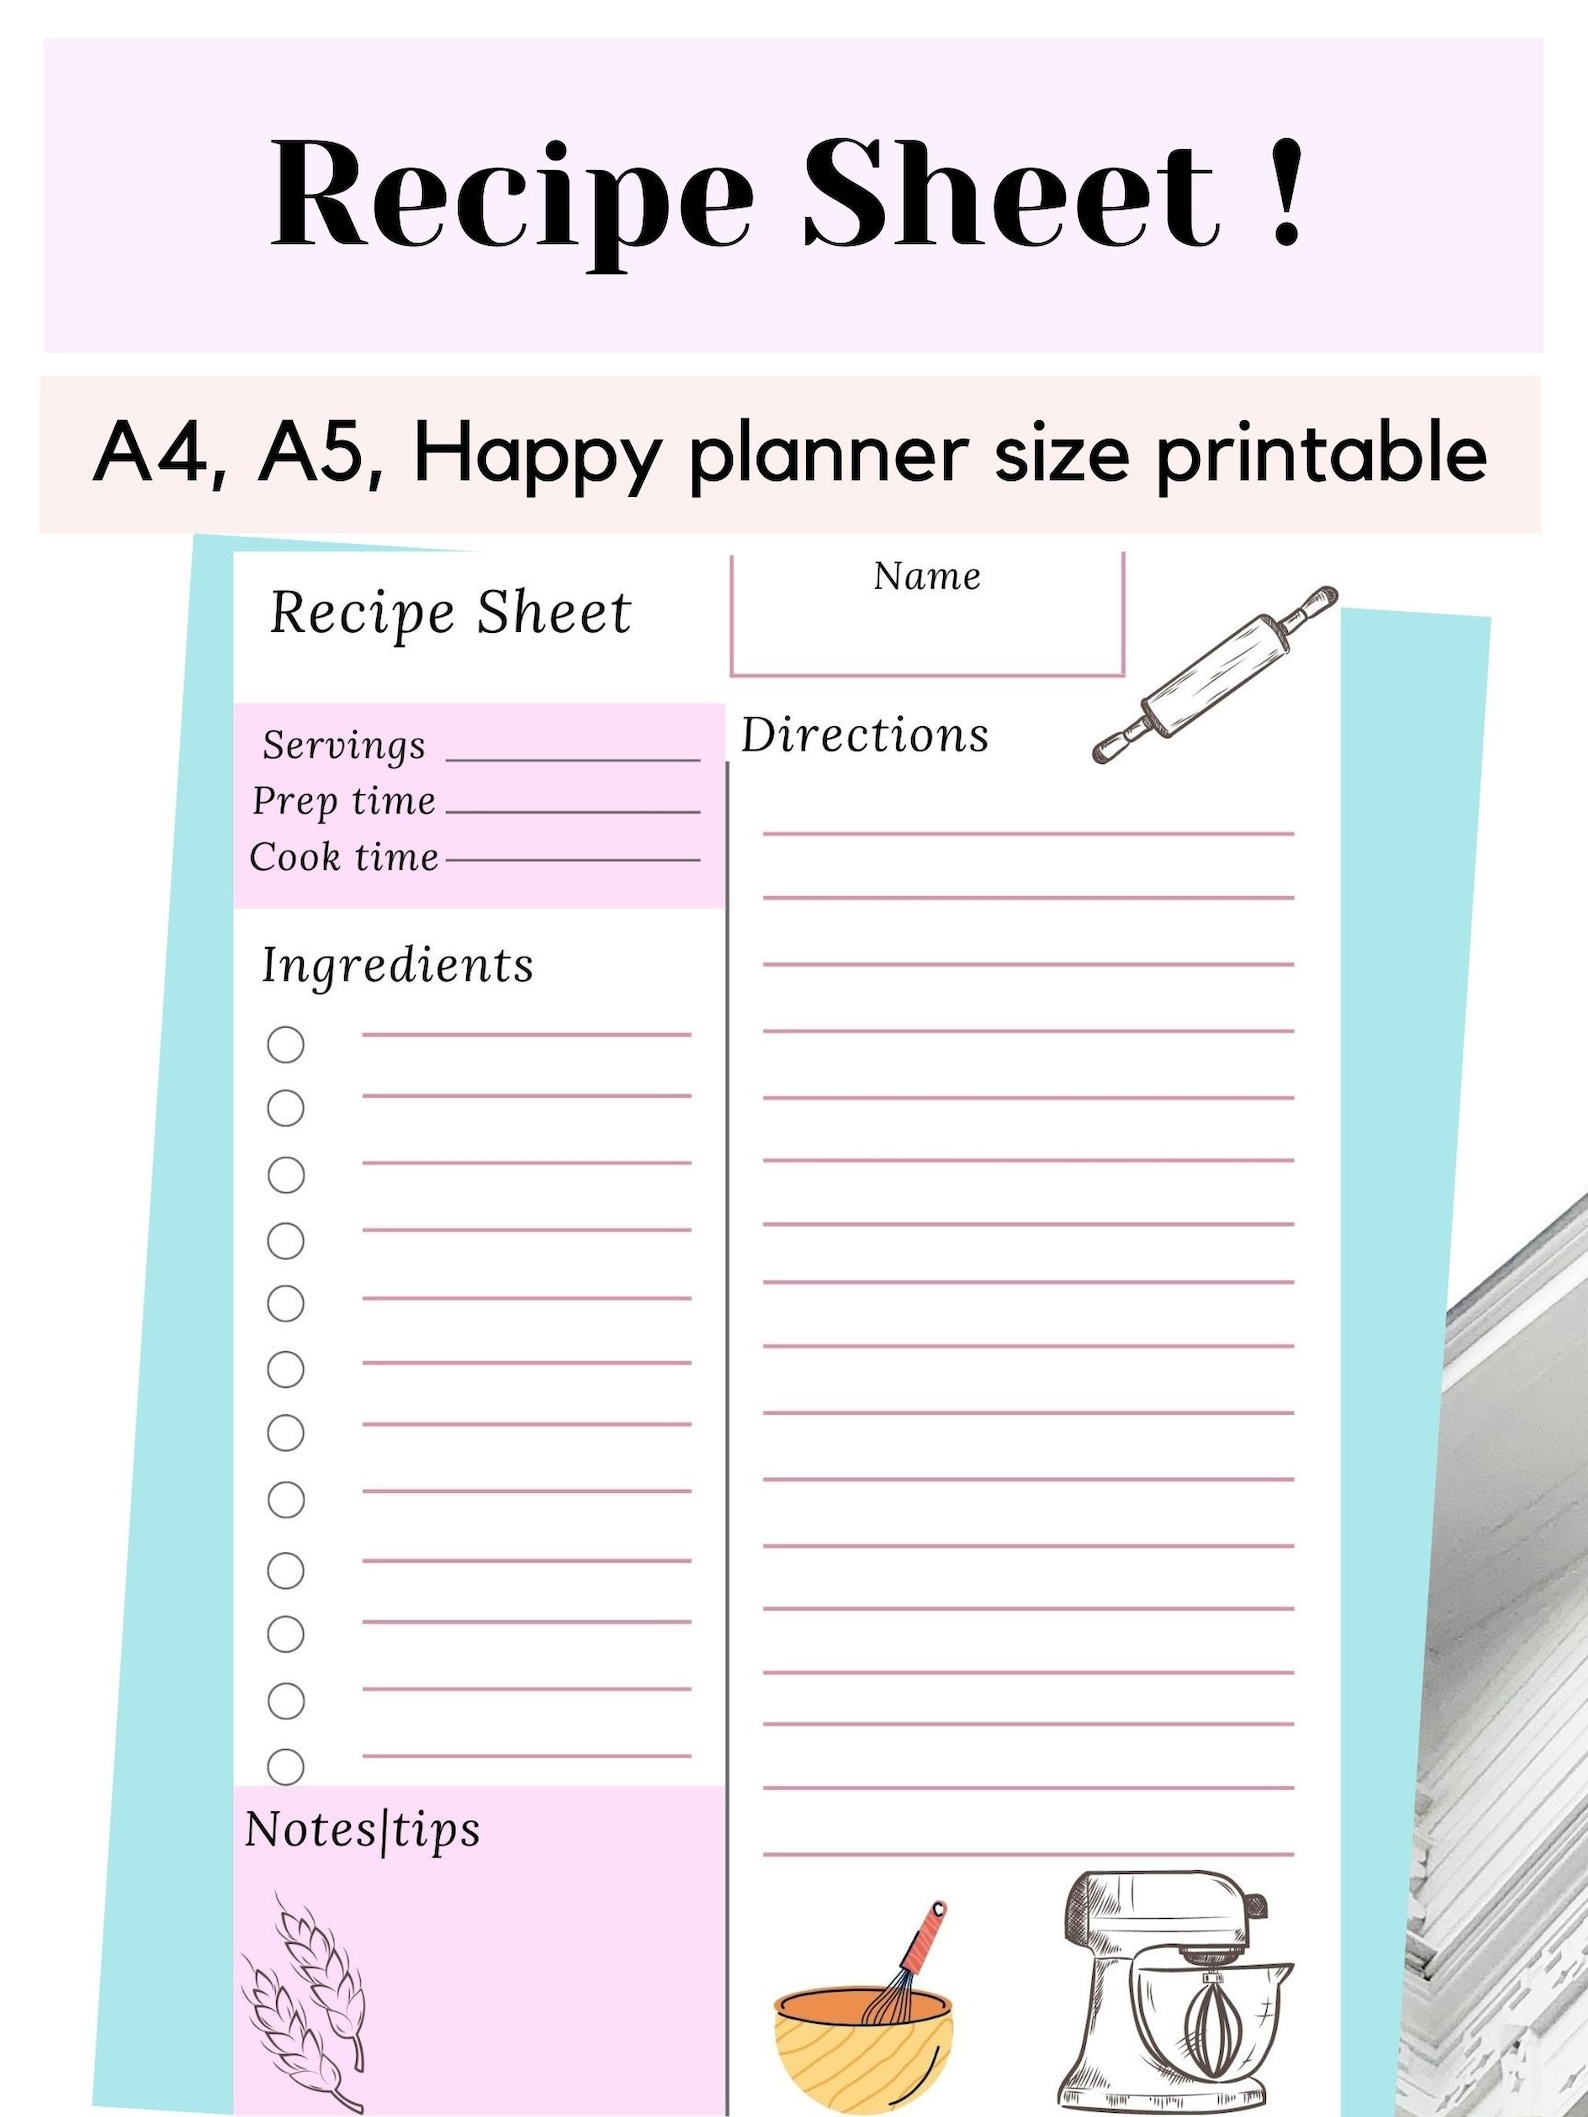 Recipe Sheet Printable Template A4 A5 Happy size planner | Etsy